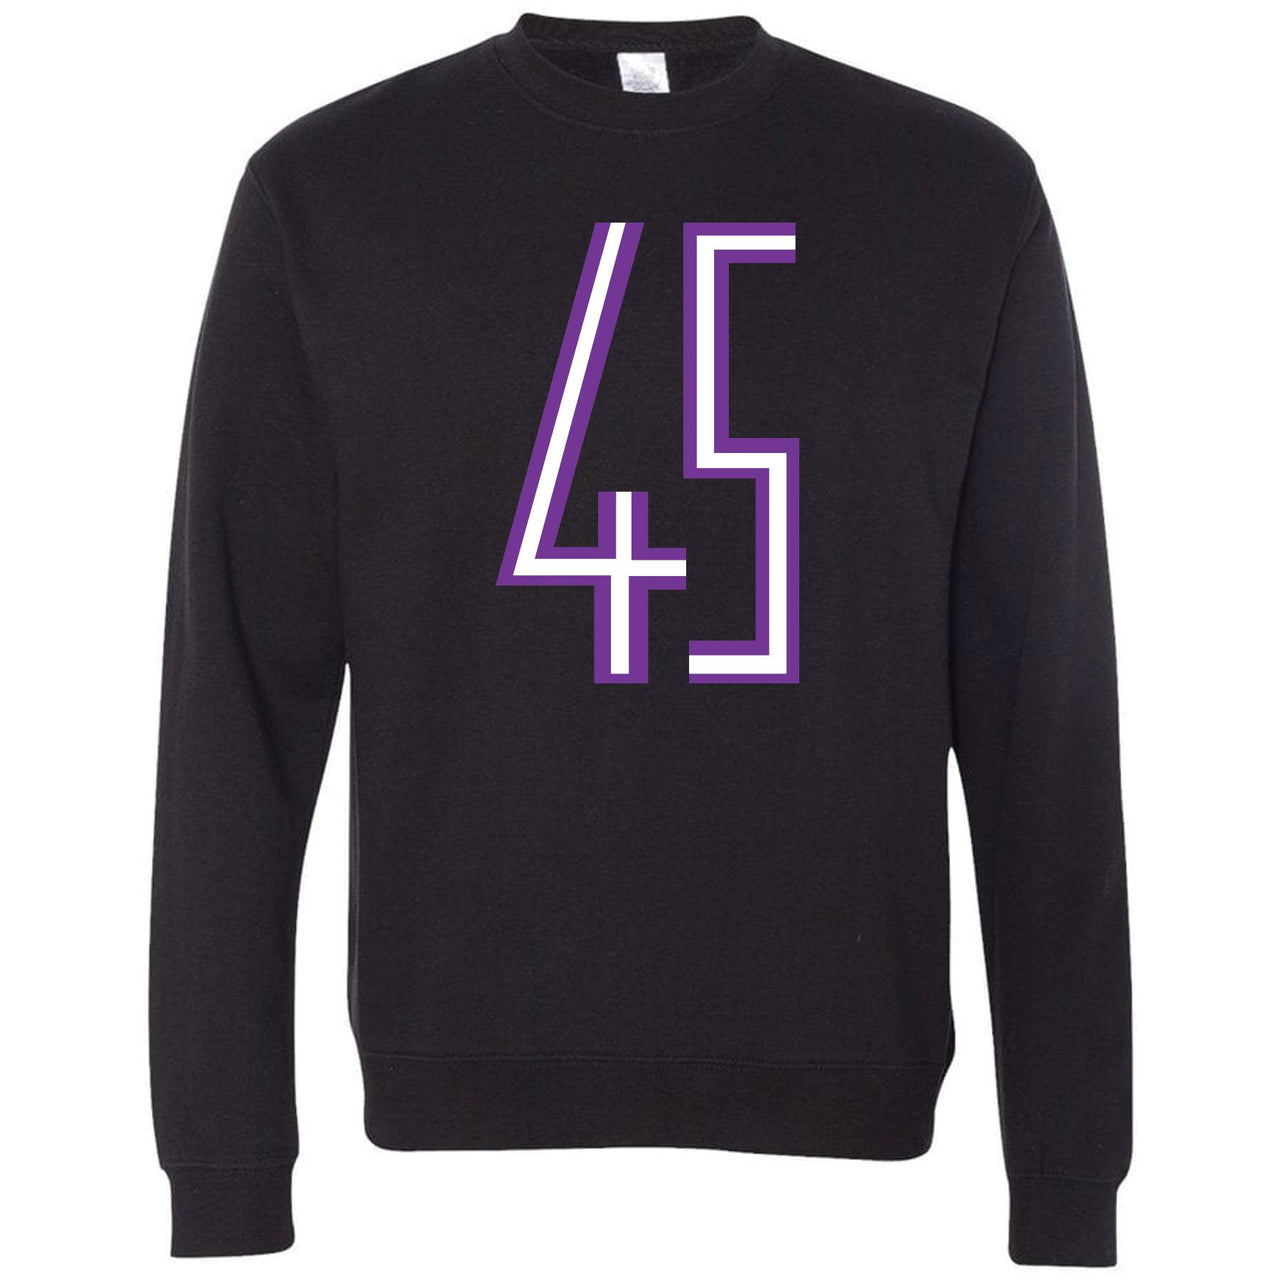 Printed on the front of the Jordan 11 Concord 45 sneaker matching crewneck sweatshirt is the 45 logo in purple and white